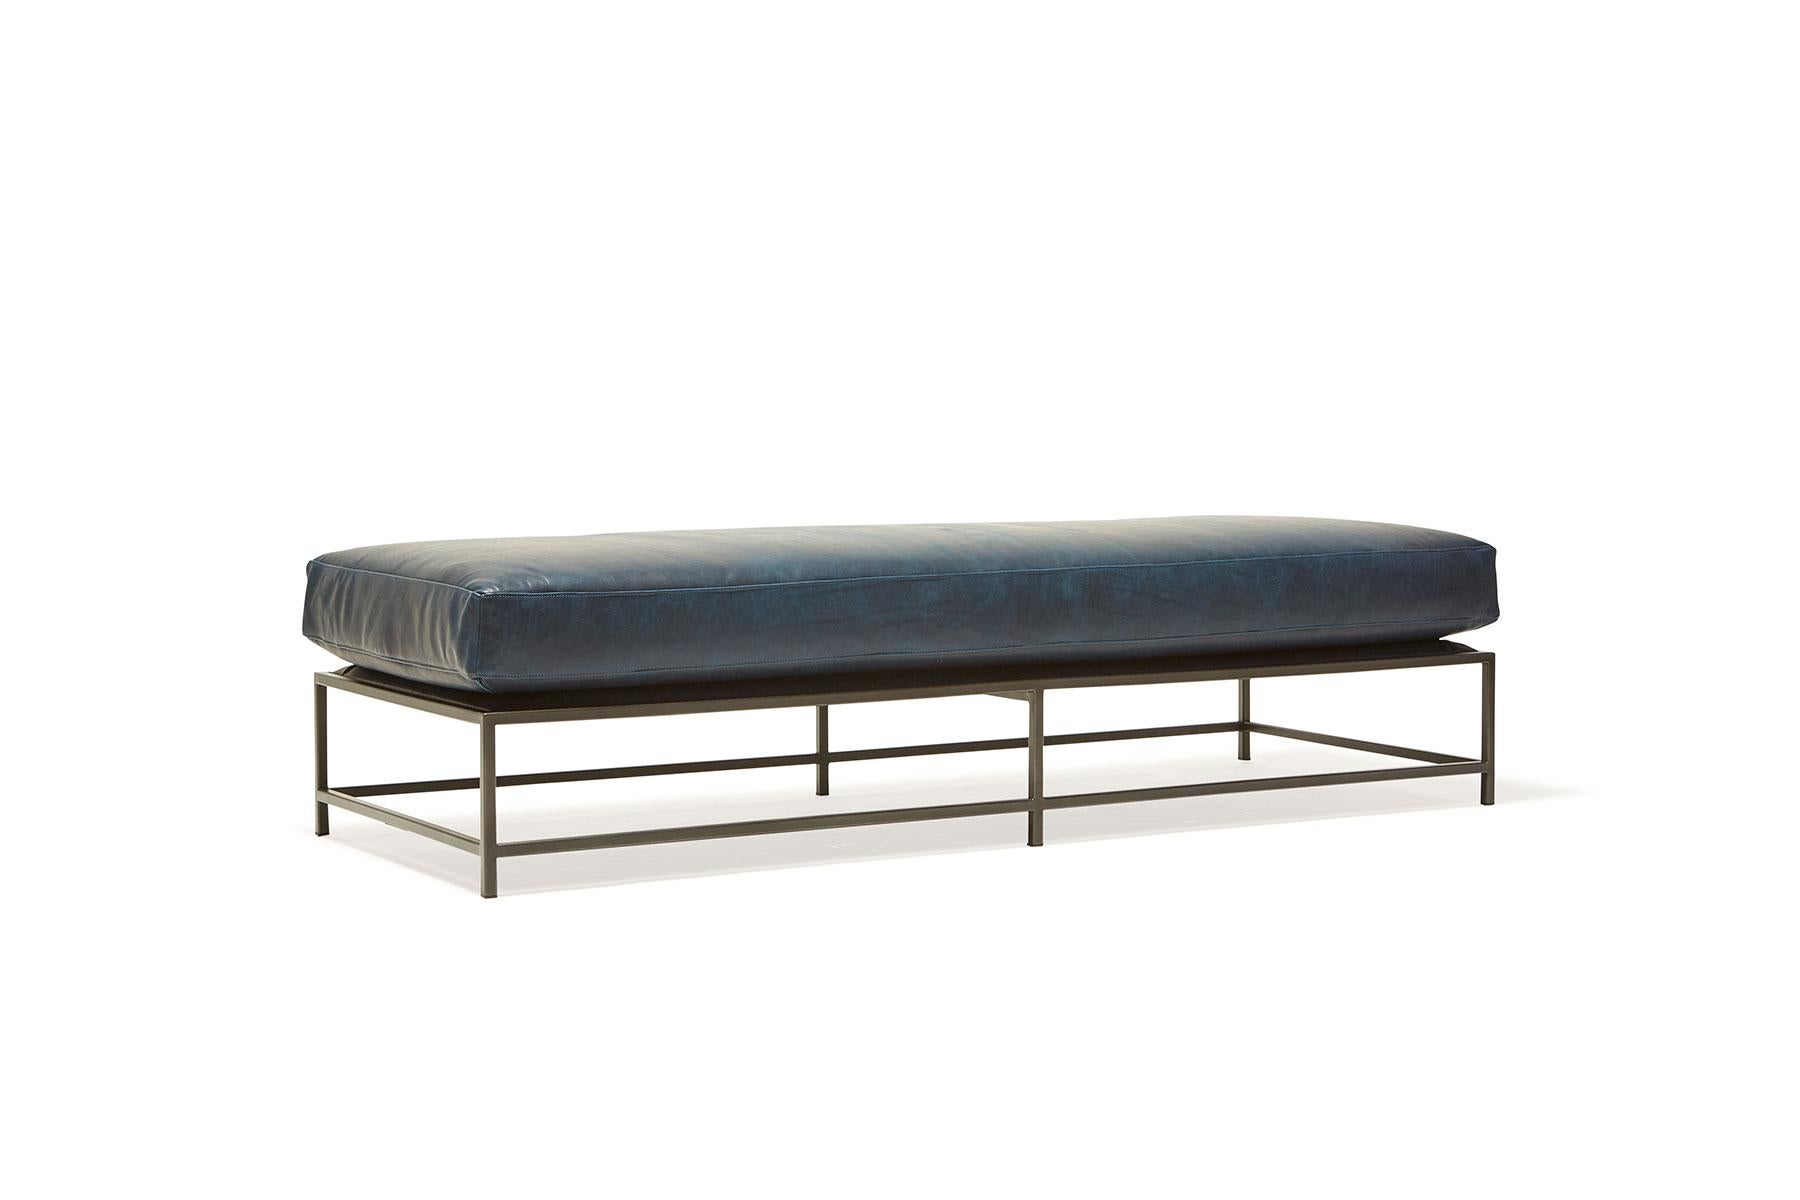 The Inheritance bench is a versatile piece that can be used as a chaise extension on any sofa, as an independent seating option or as a large upholstered coffee table. 

This extra large variation is upholstered in Brentwood Navy leather by Moore